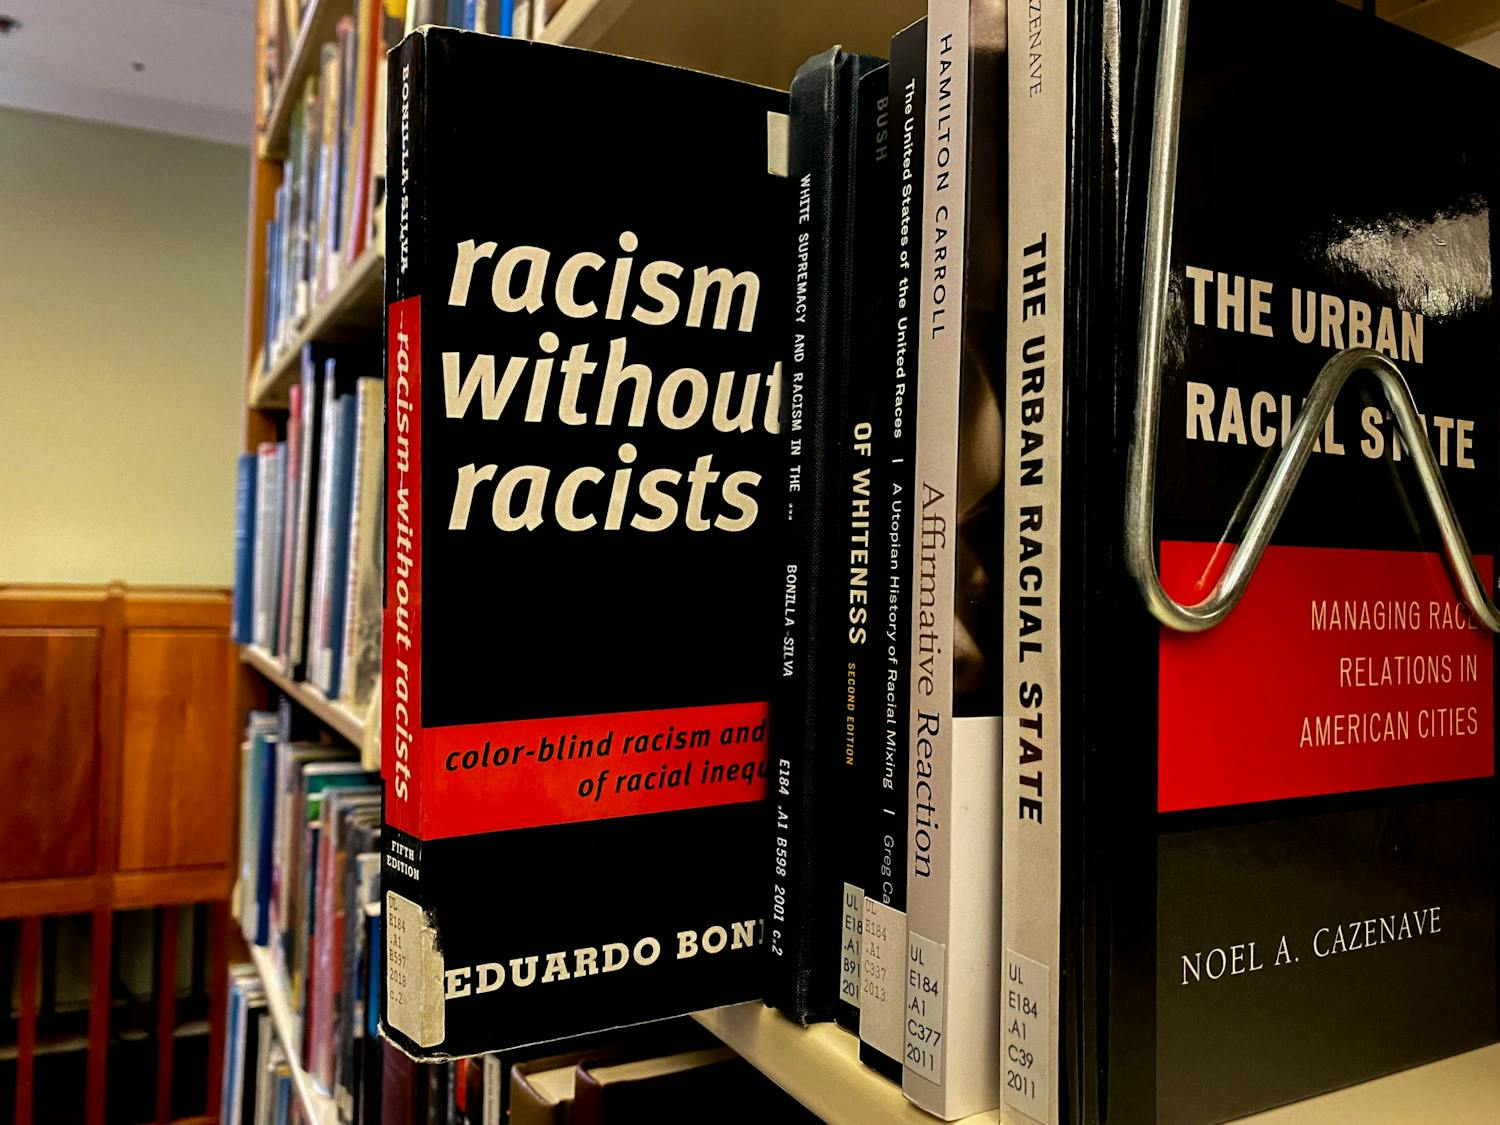 "Racism Without Racists" by Eduardo Bonilla-Silva, housed at the Undergraduate Library, is one of several books included in the AfroLatinx Authors &amp; Stories collection, a collaboration by University Libraries and the Carolina Latinx Center.